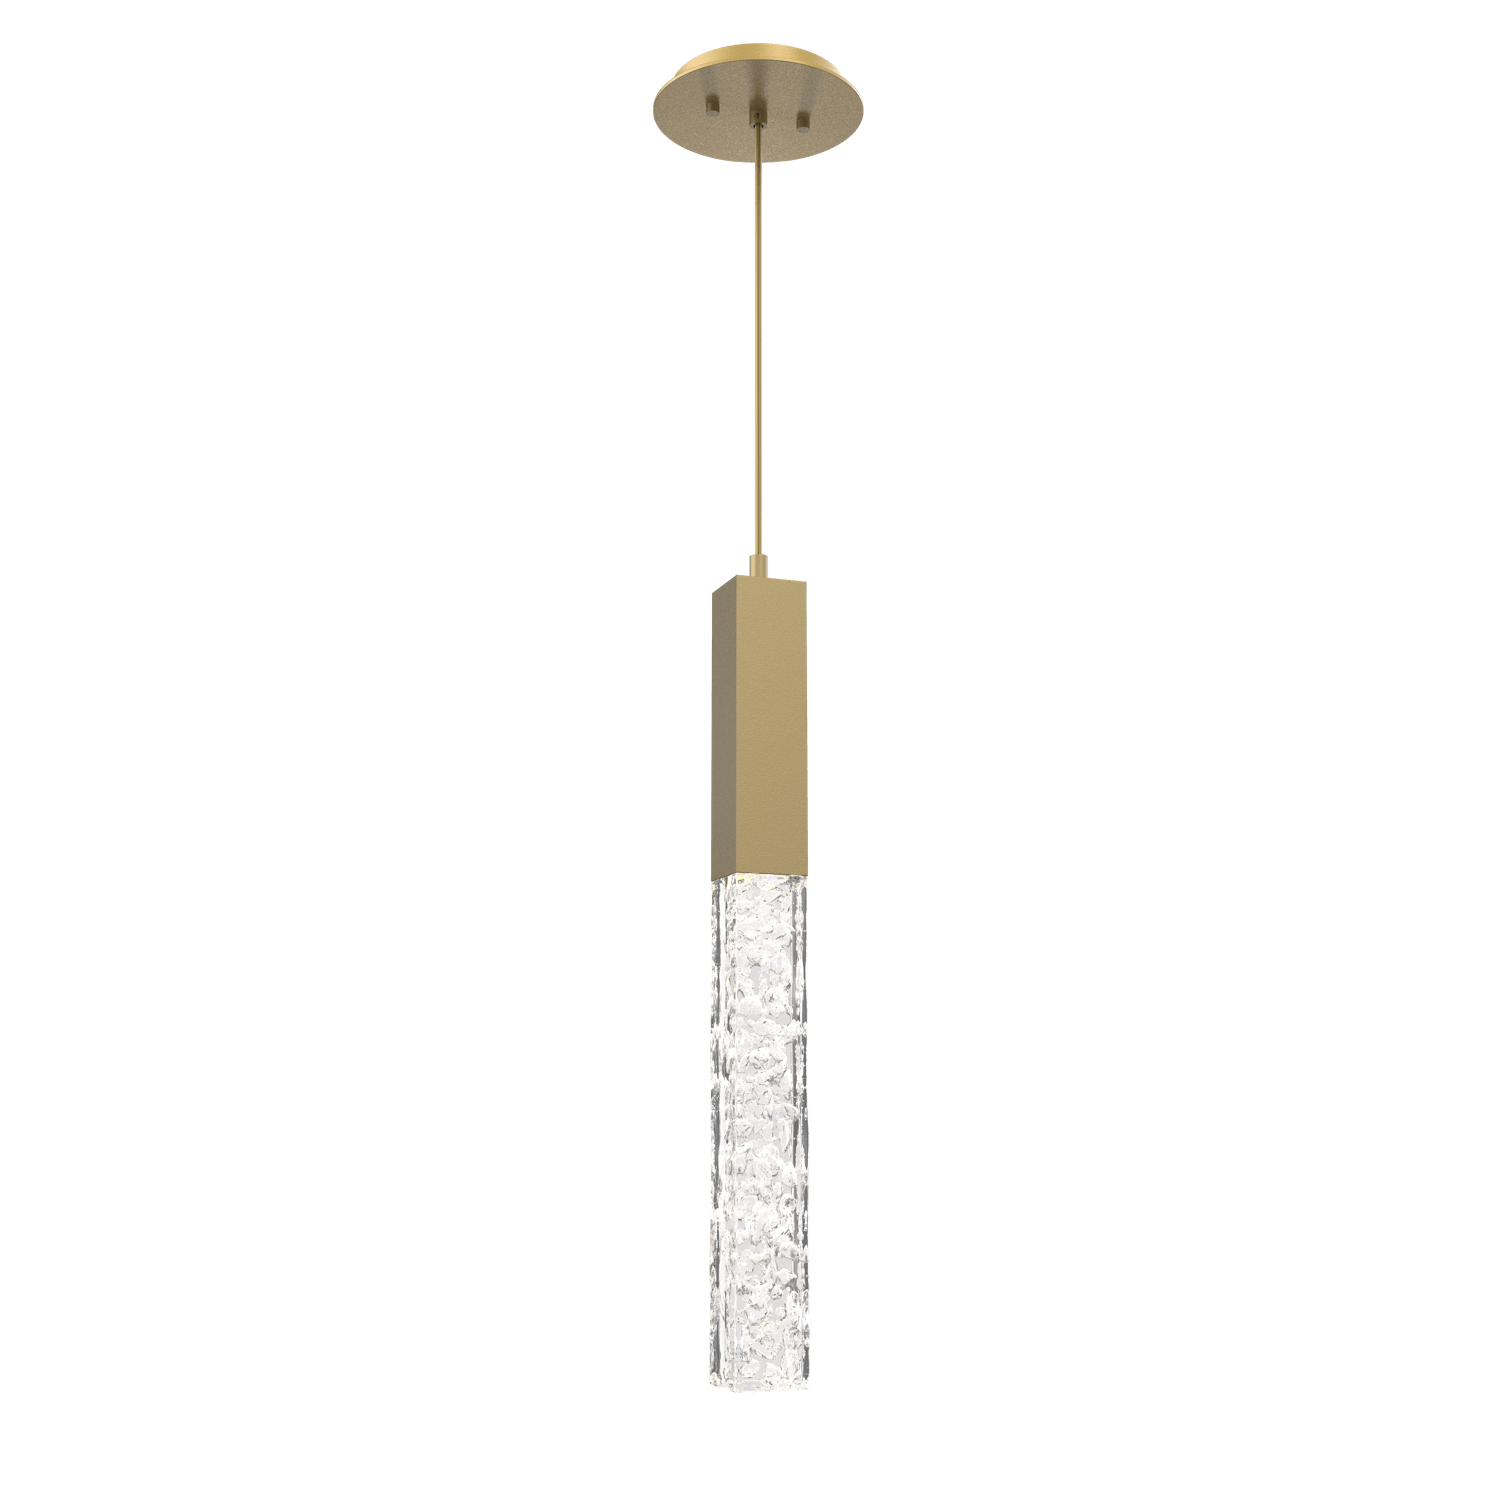 LAB0060-01-GB-GC-Hammerton-Studio-Axis-Pendant-Light-with-Gilded-Brass-finish-and-clear-cast-glass-and-LED-lamping